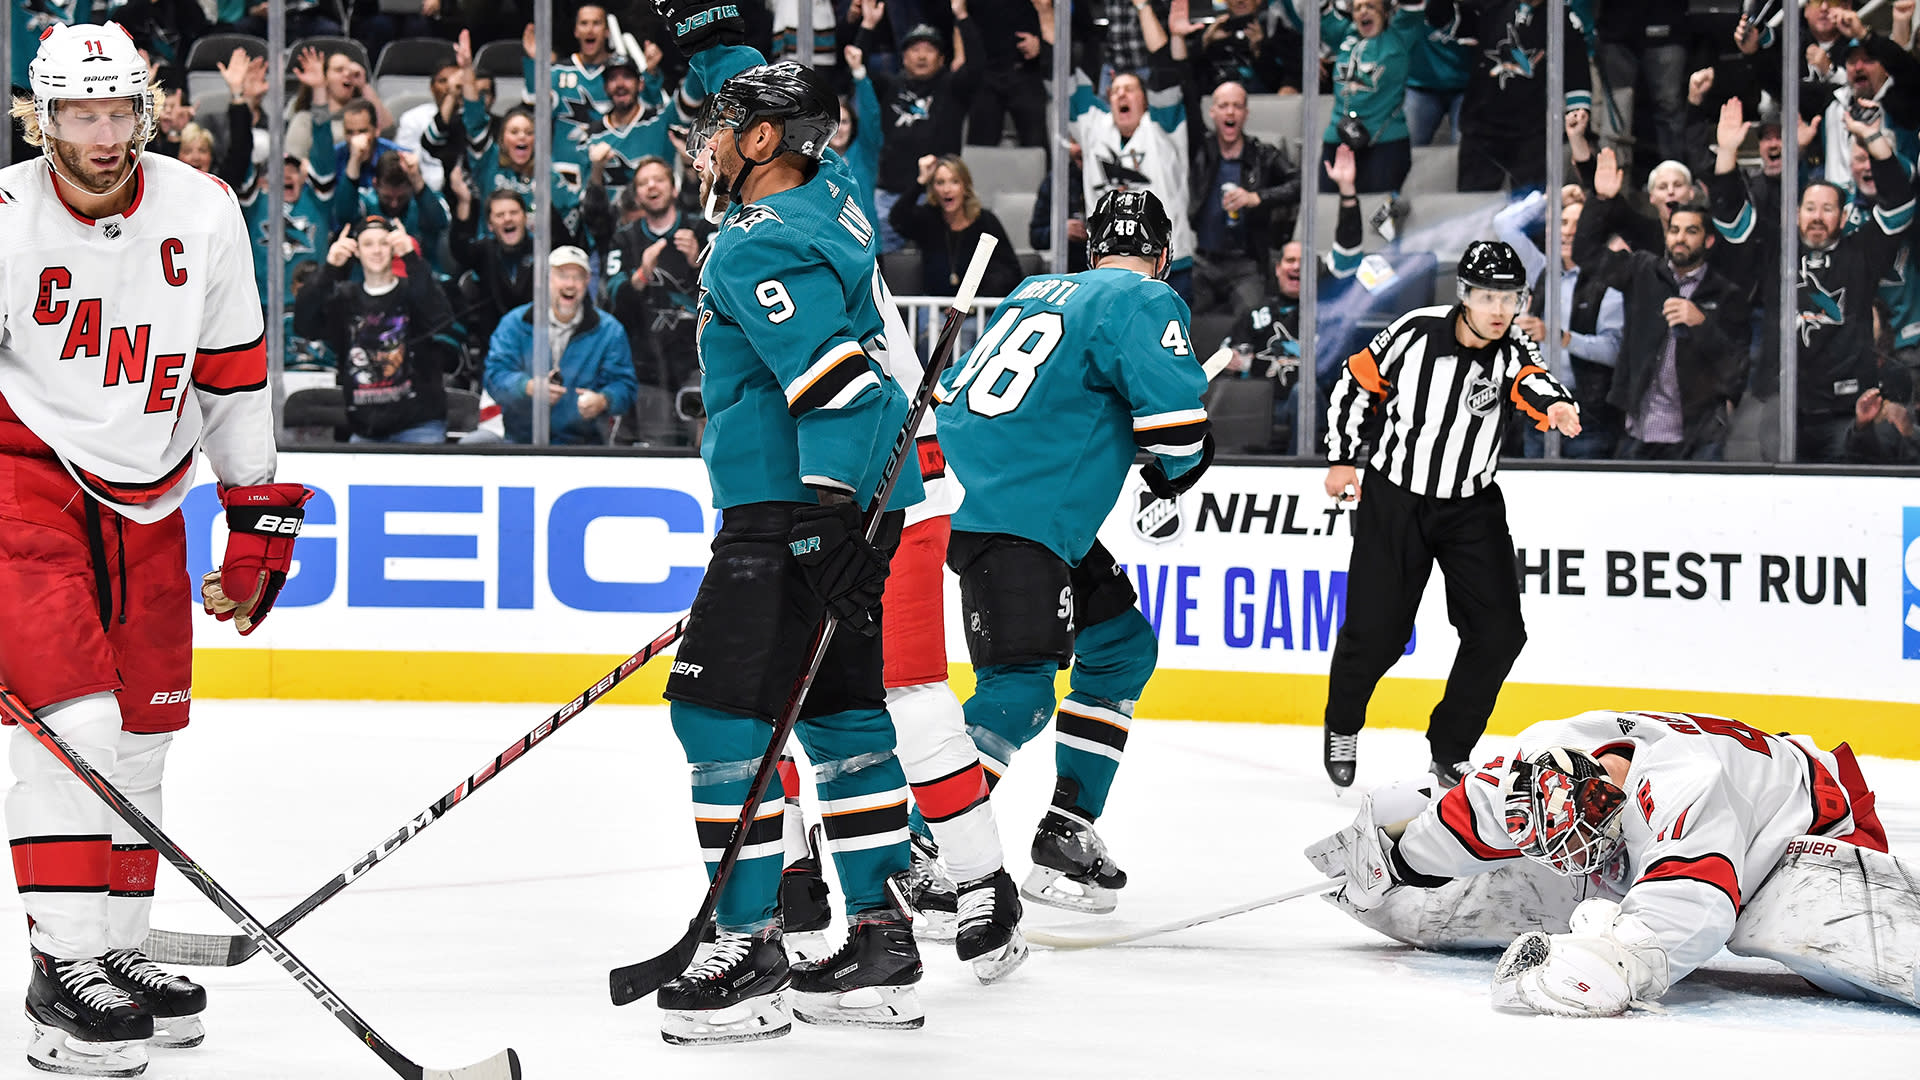 Sharks record with first-period hat trick